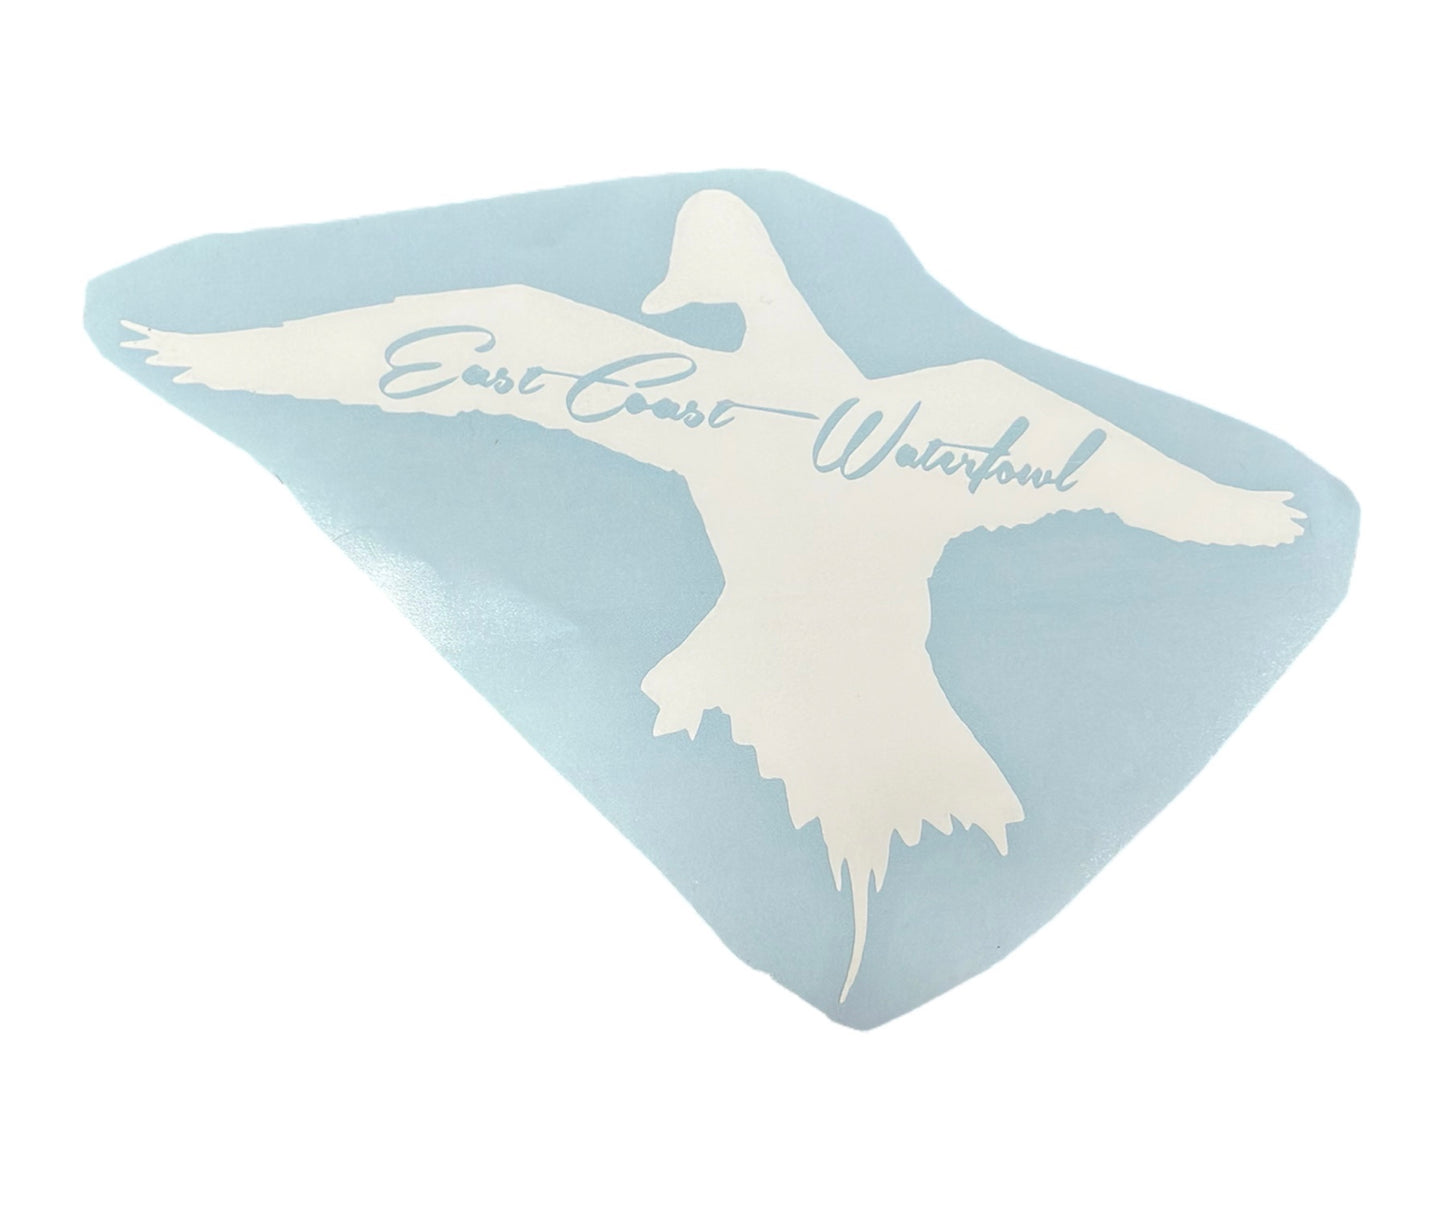 8"x5.5" Cupped Up Pintail Decals